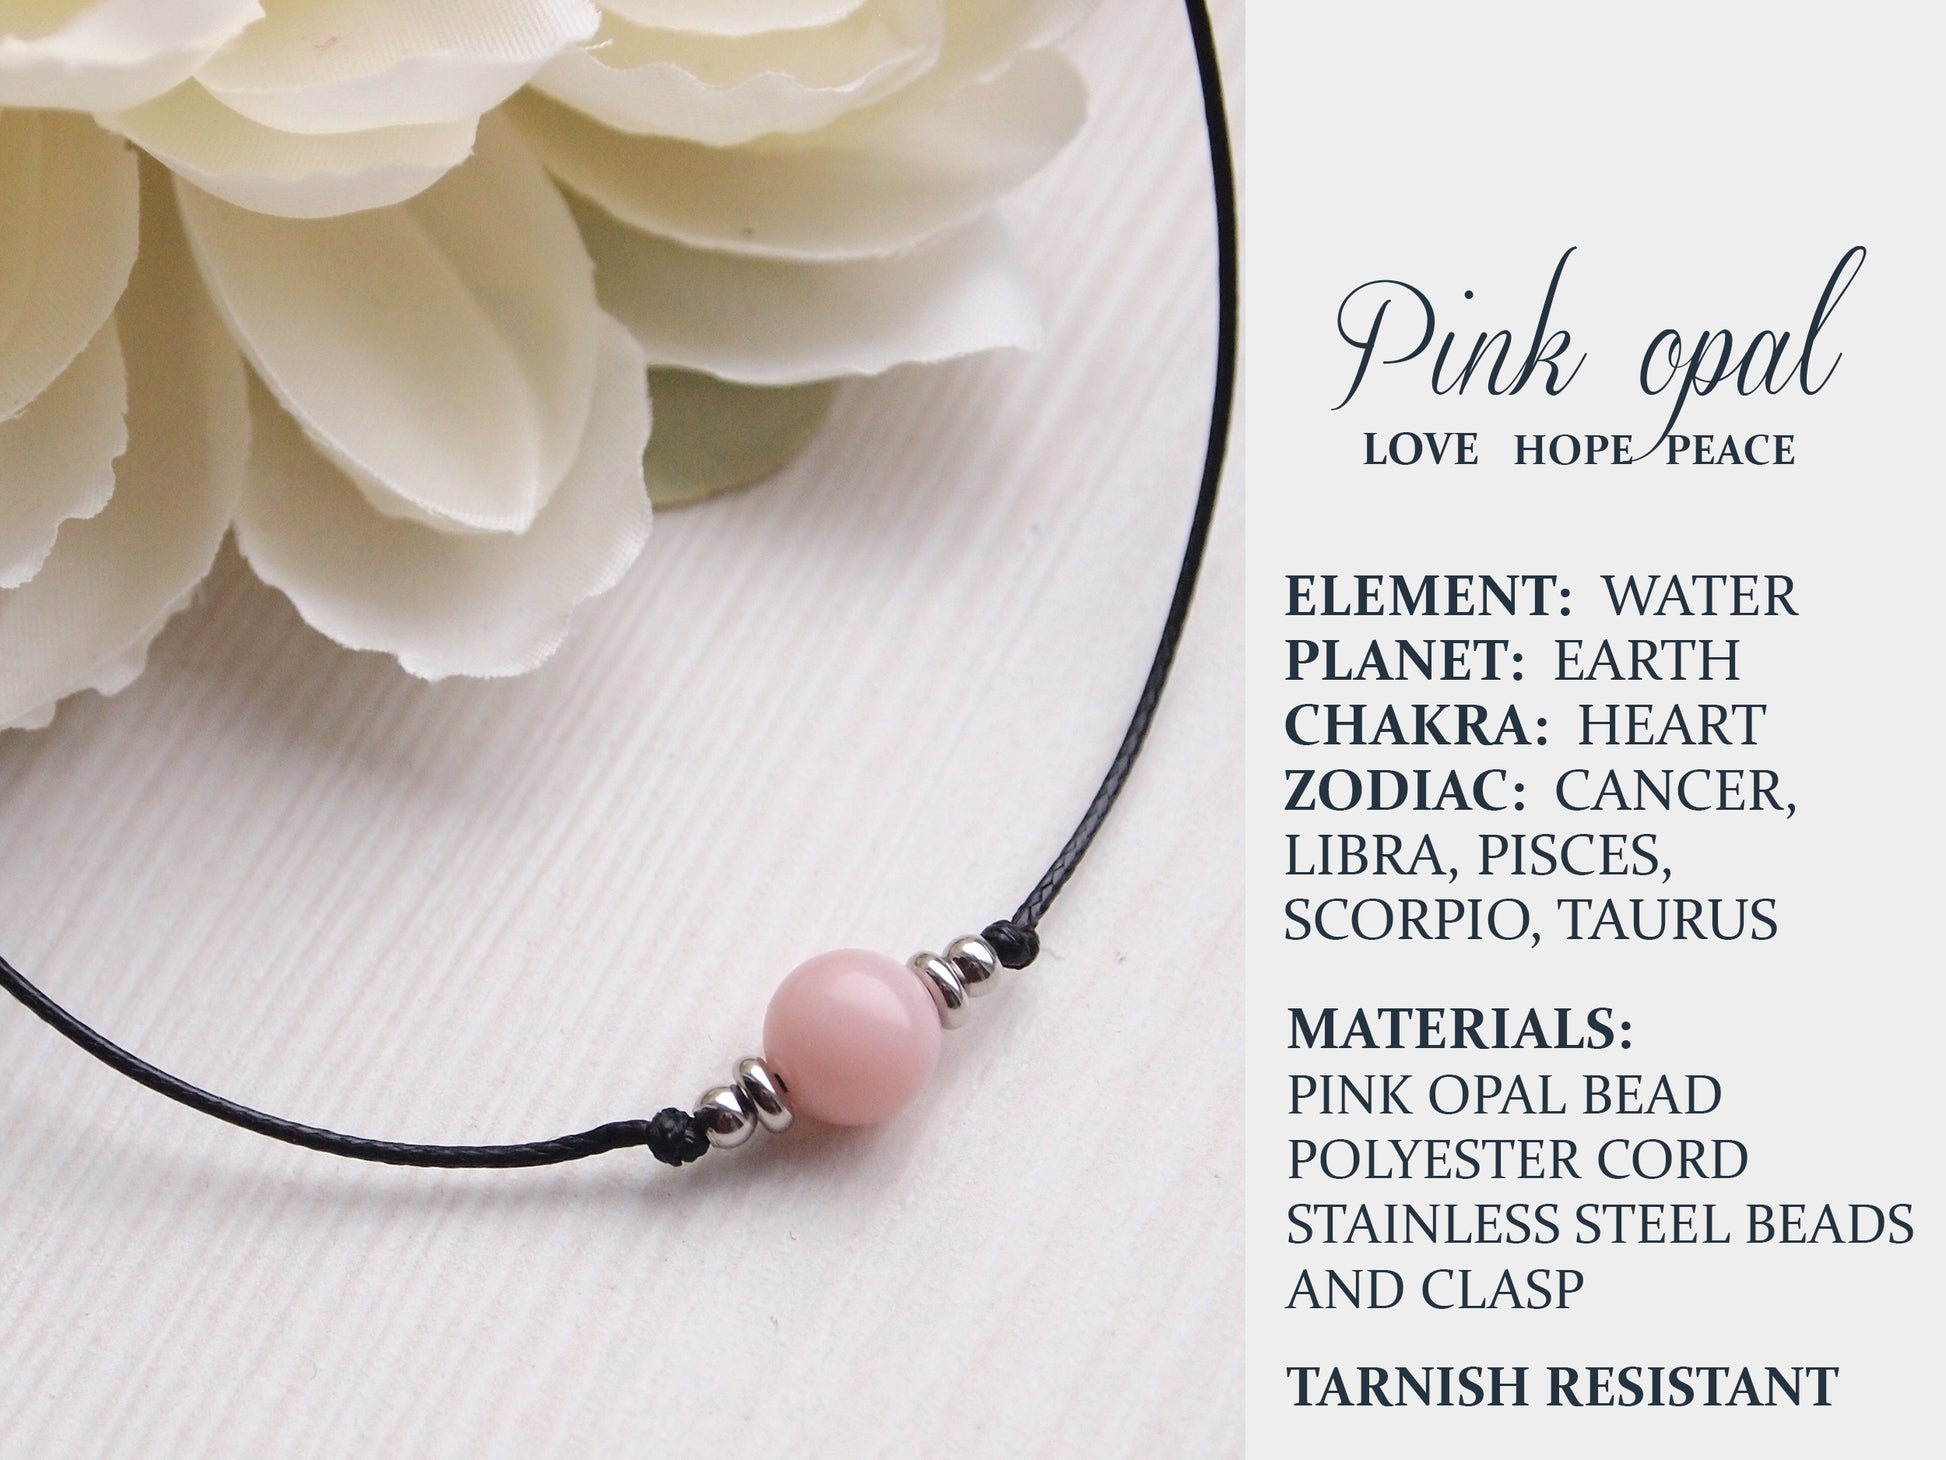 pink opal meaning, pink opal properties